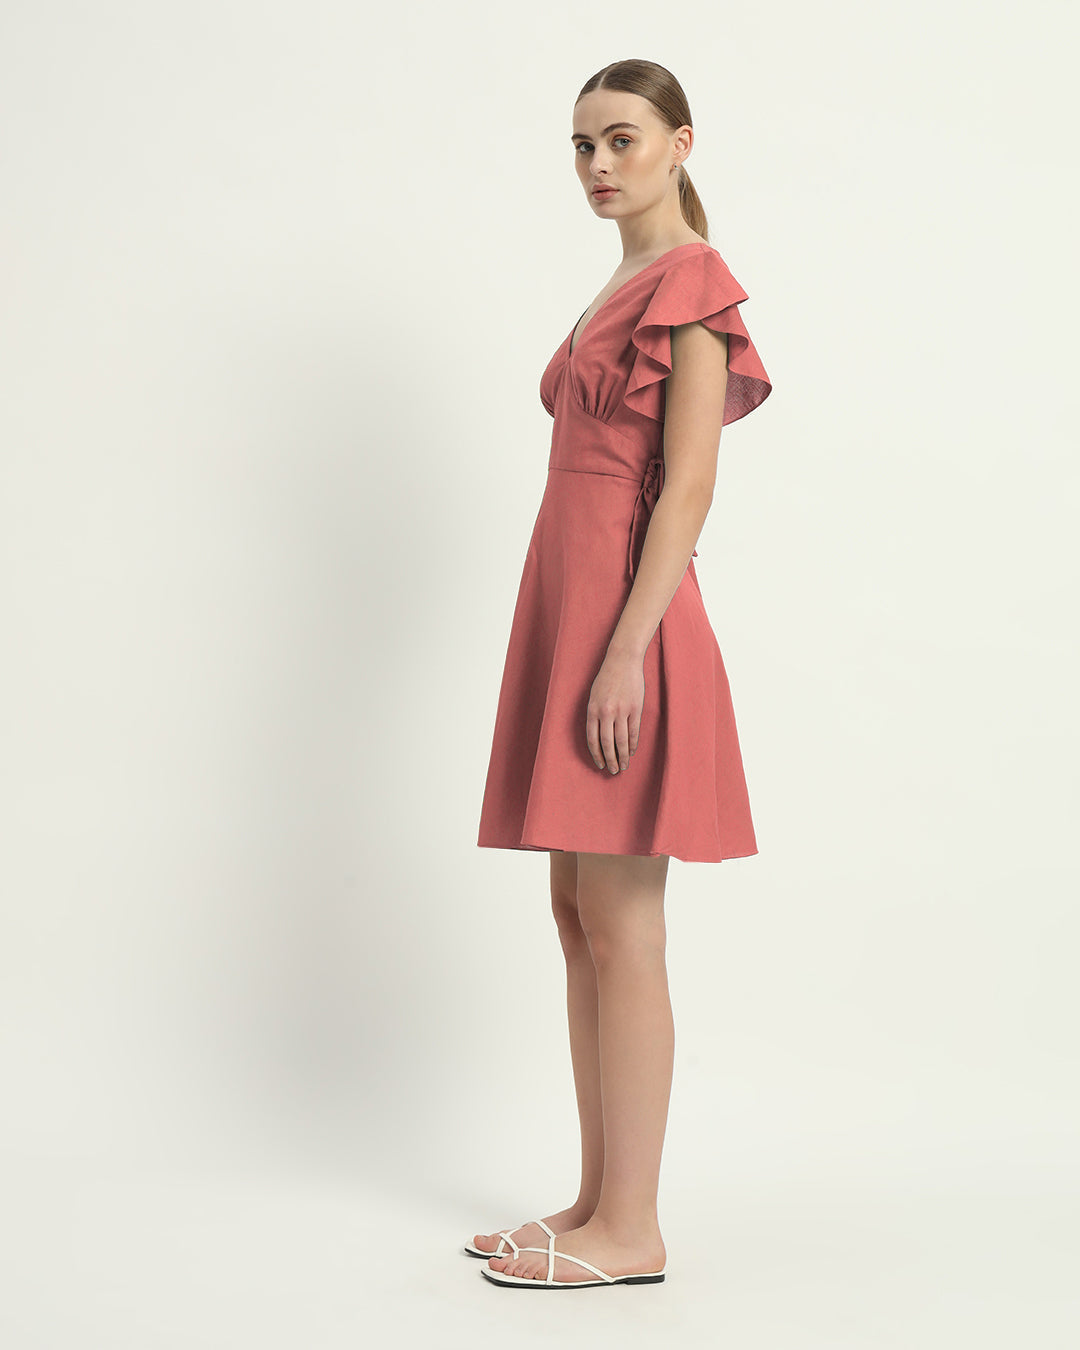 The Ivory Pink Fairlie Cotton Dress